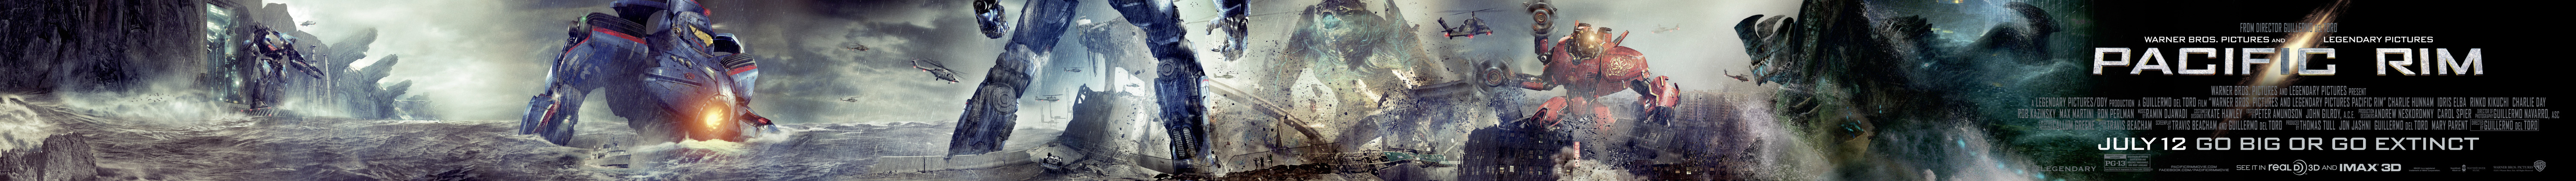 Extra Large Movie Poster Image for Pacific Rim (#13 of 26)